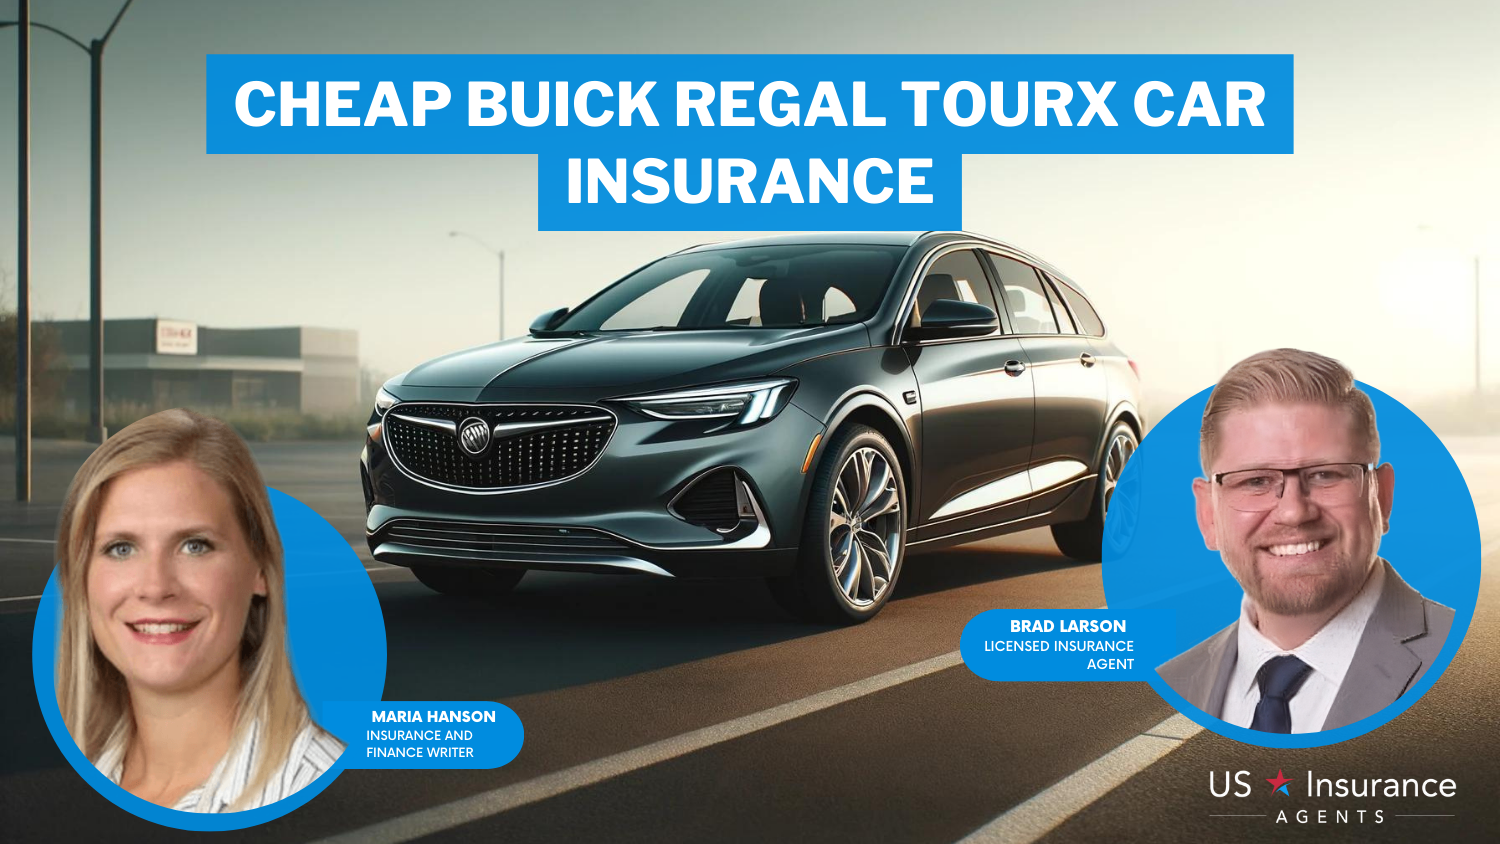 Cheap Buick Regal TourX car insurance: AAA, State Farm, and Travelers 